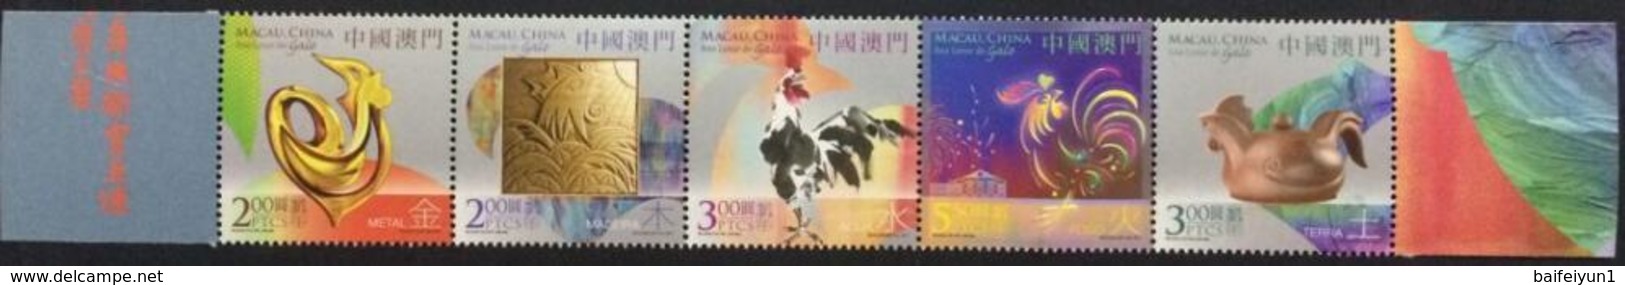 Macao 2017 MNH Year Of Rooster 5v Strip Chinese Lunar New Year Stamps - Ongebruikt